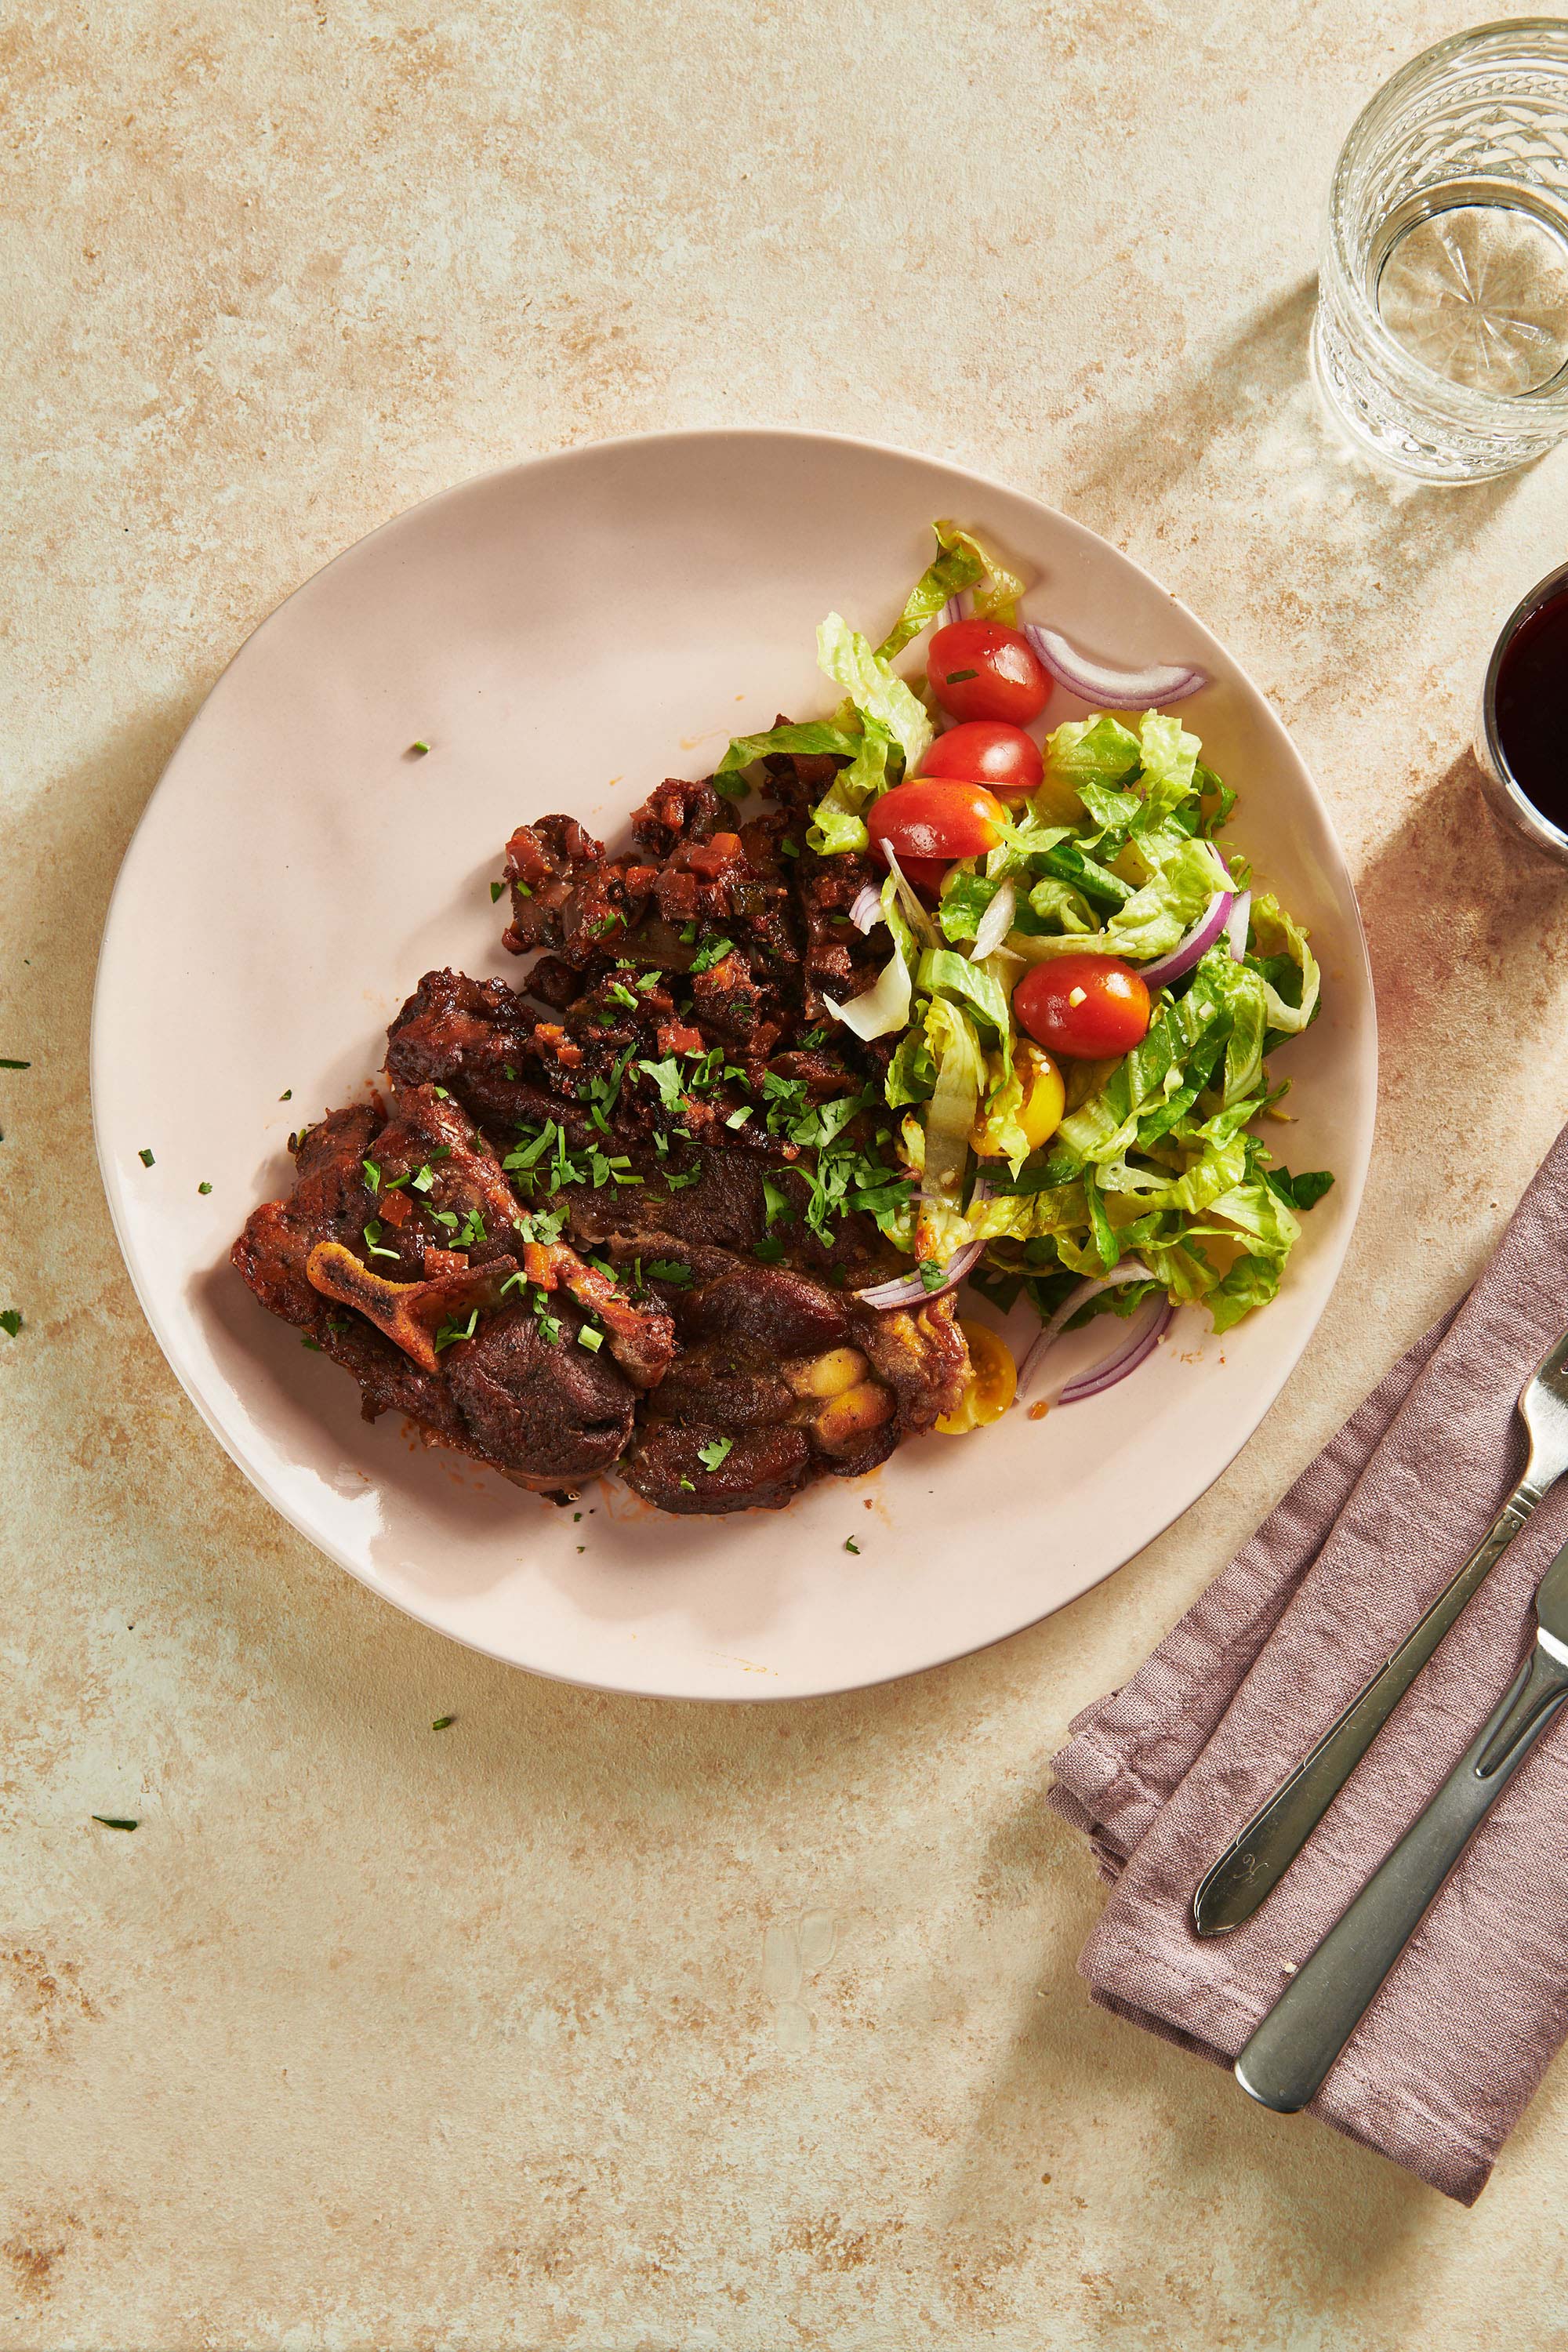 Plate with Braised Lamb Shoulder Chops and salad set with utensils and a cloth napkin.